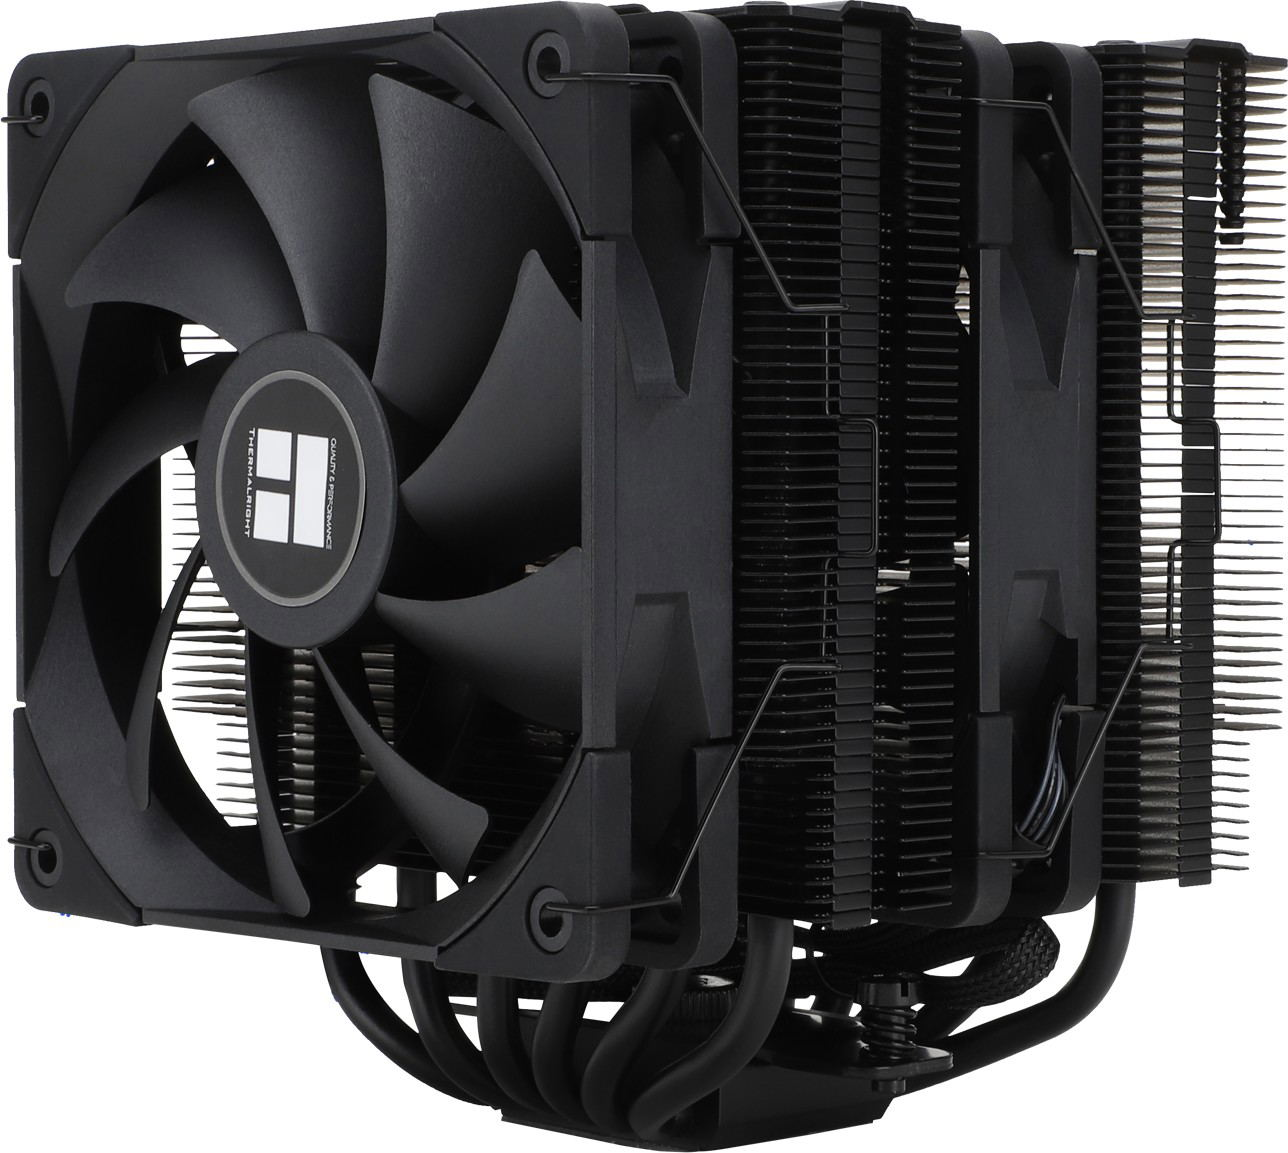 Fans & CPU Coolers